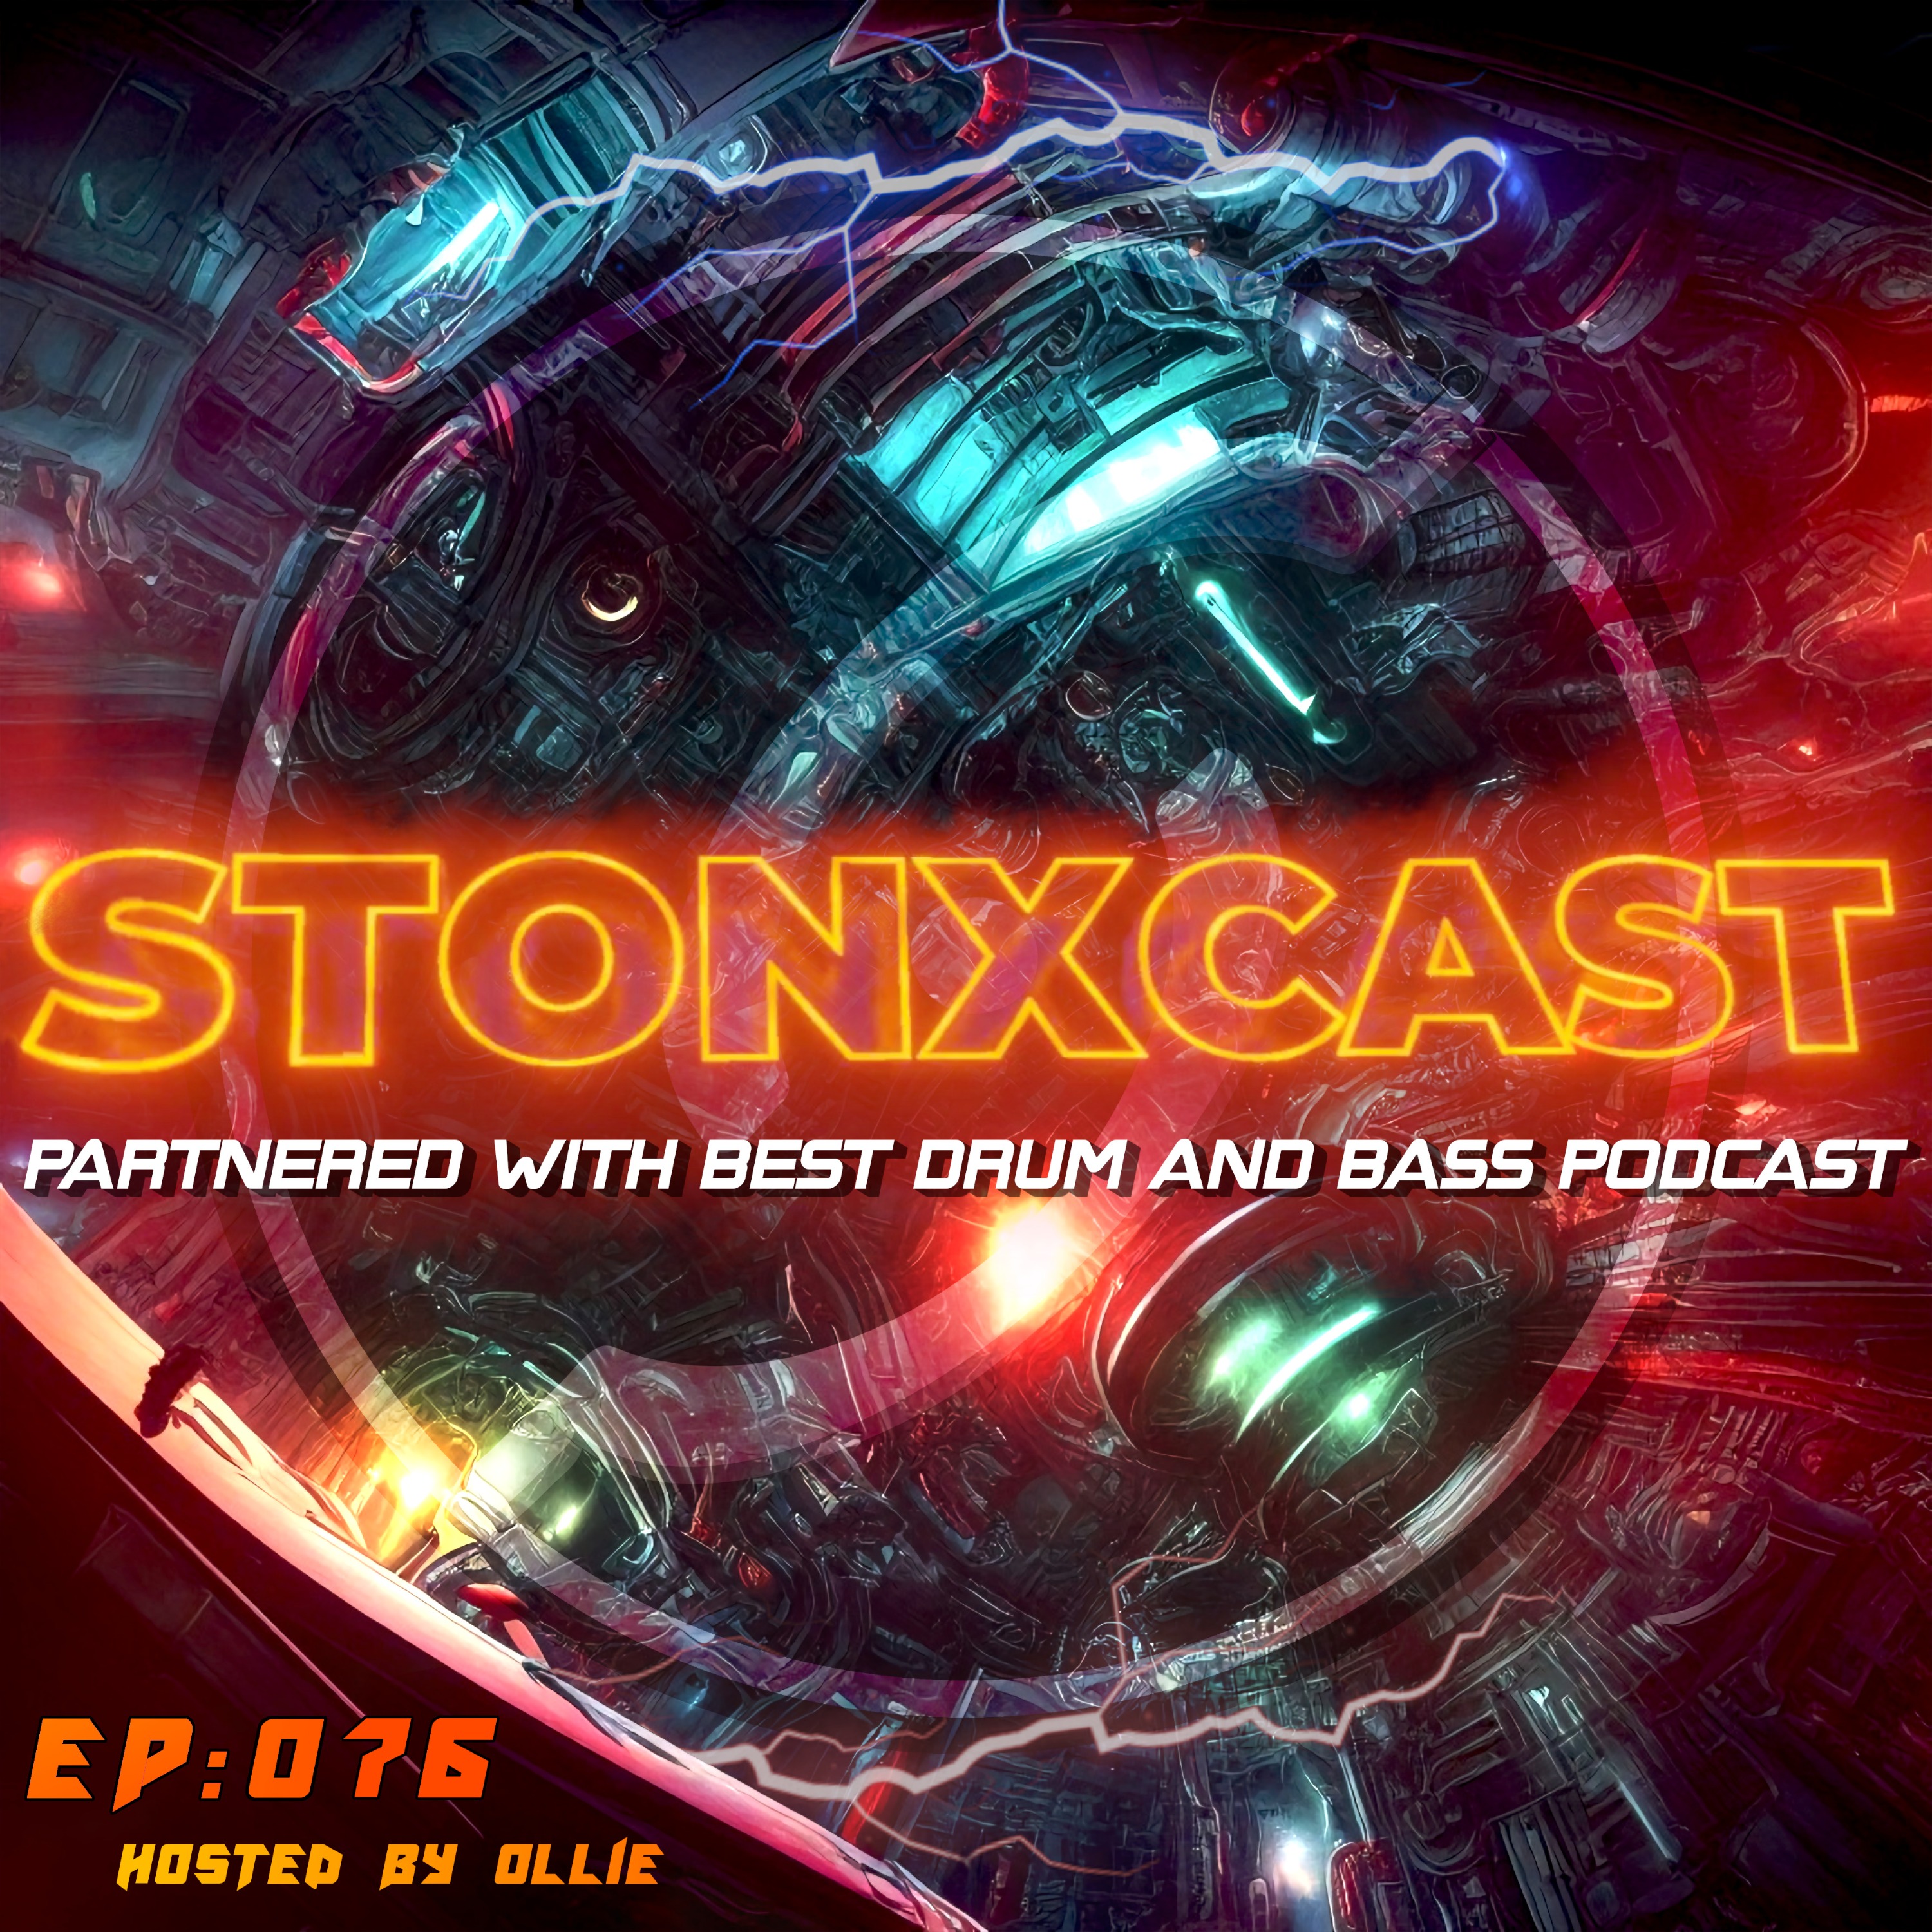 Stonxcast EP:076 - Hosted by Ollie Artwork